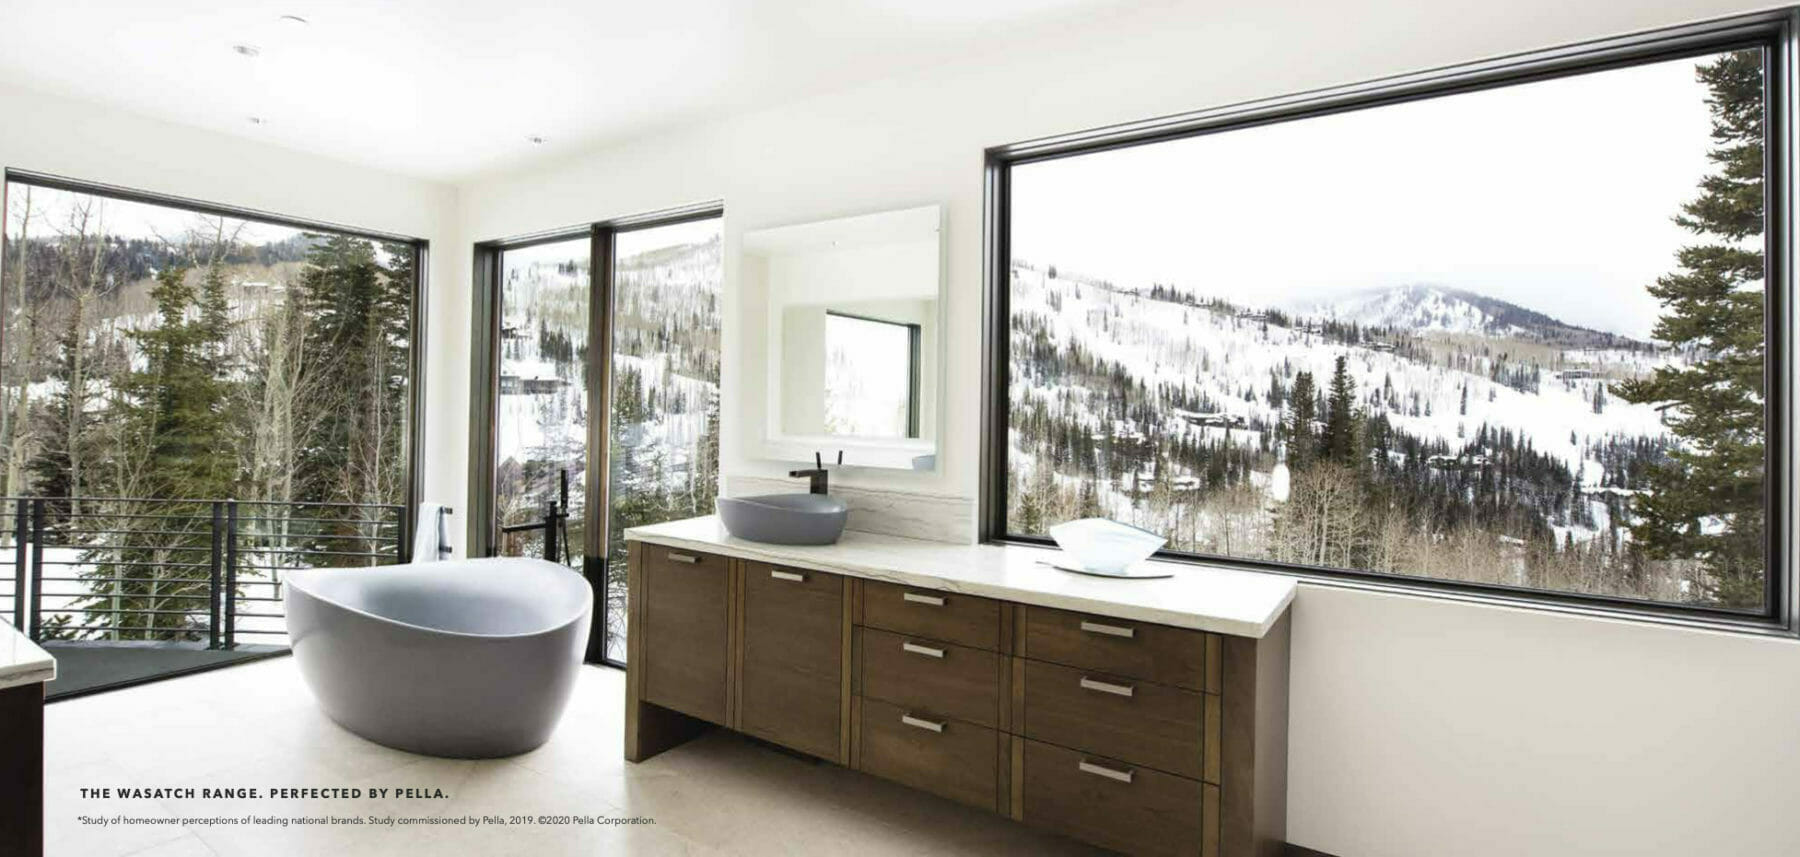 This bathroom has views of the snowy wasatch mountains of Utah